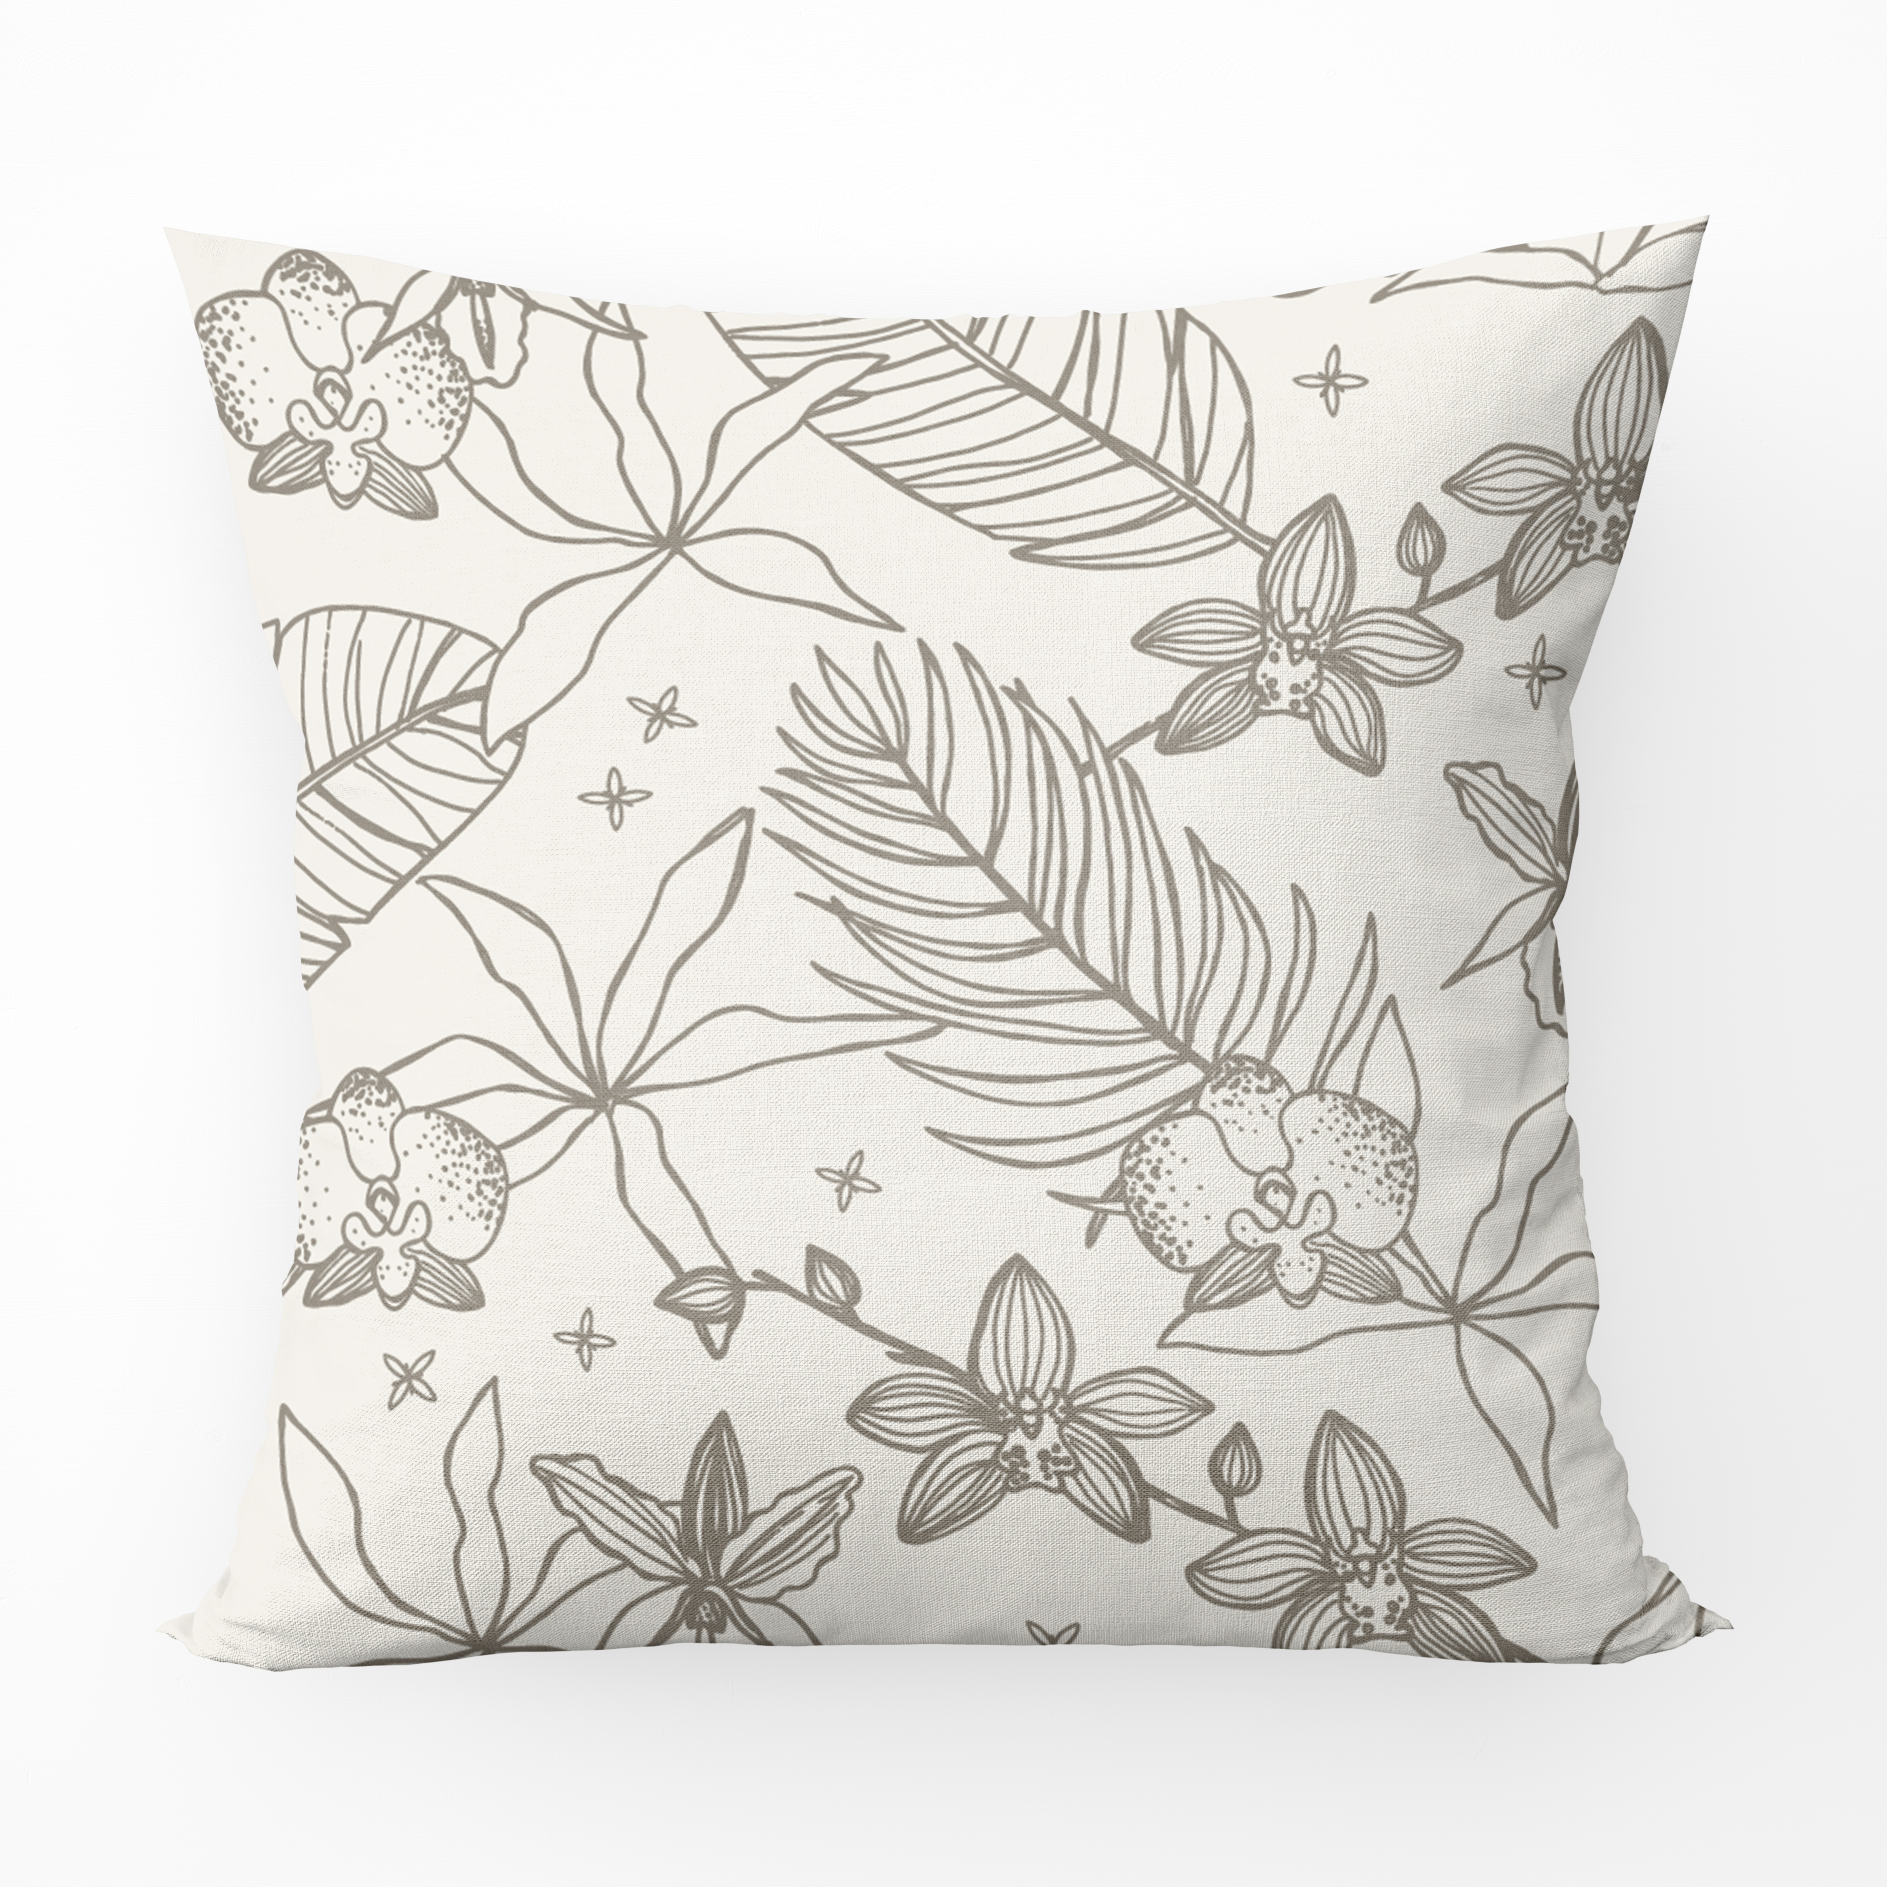 22X22" Pillow Cover in Paradise Party Soft Gray